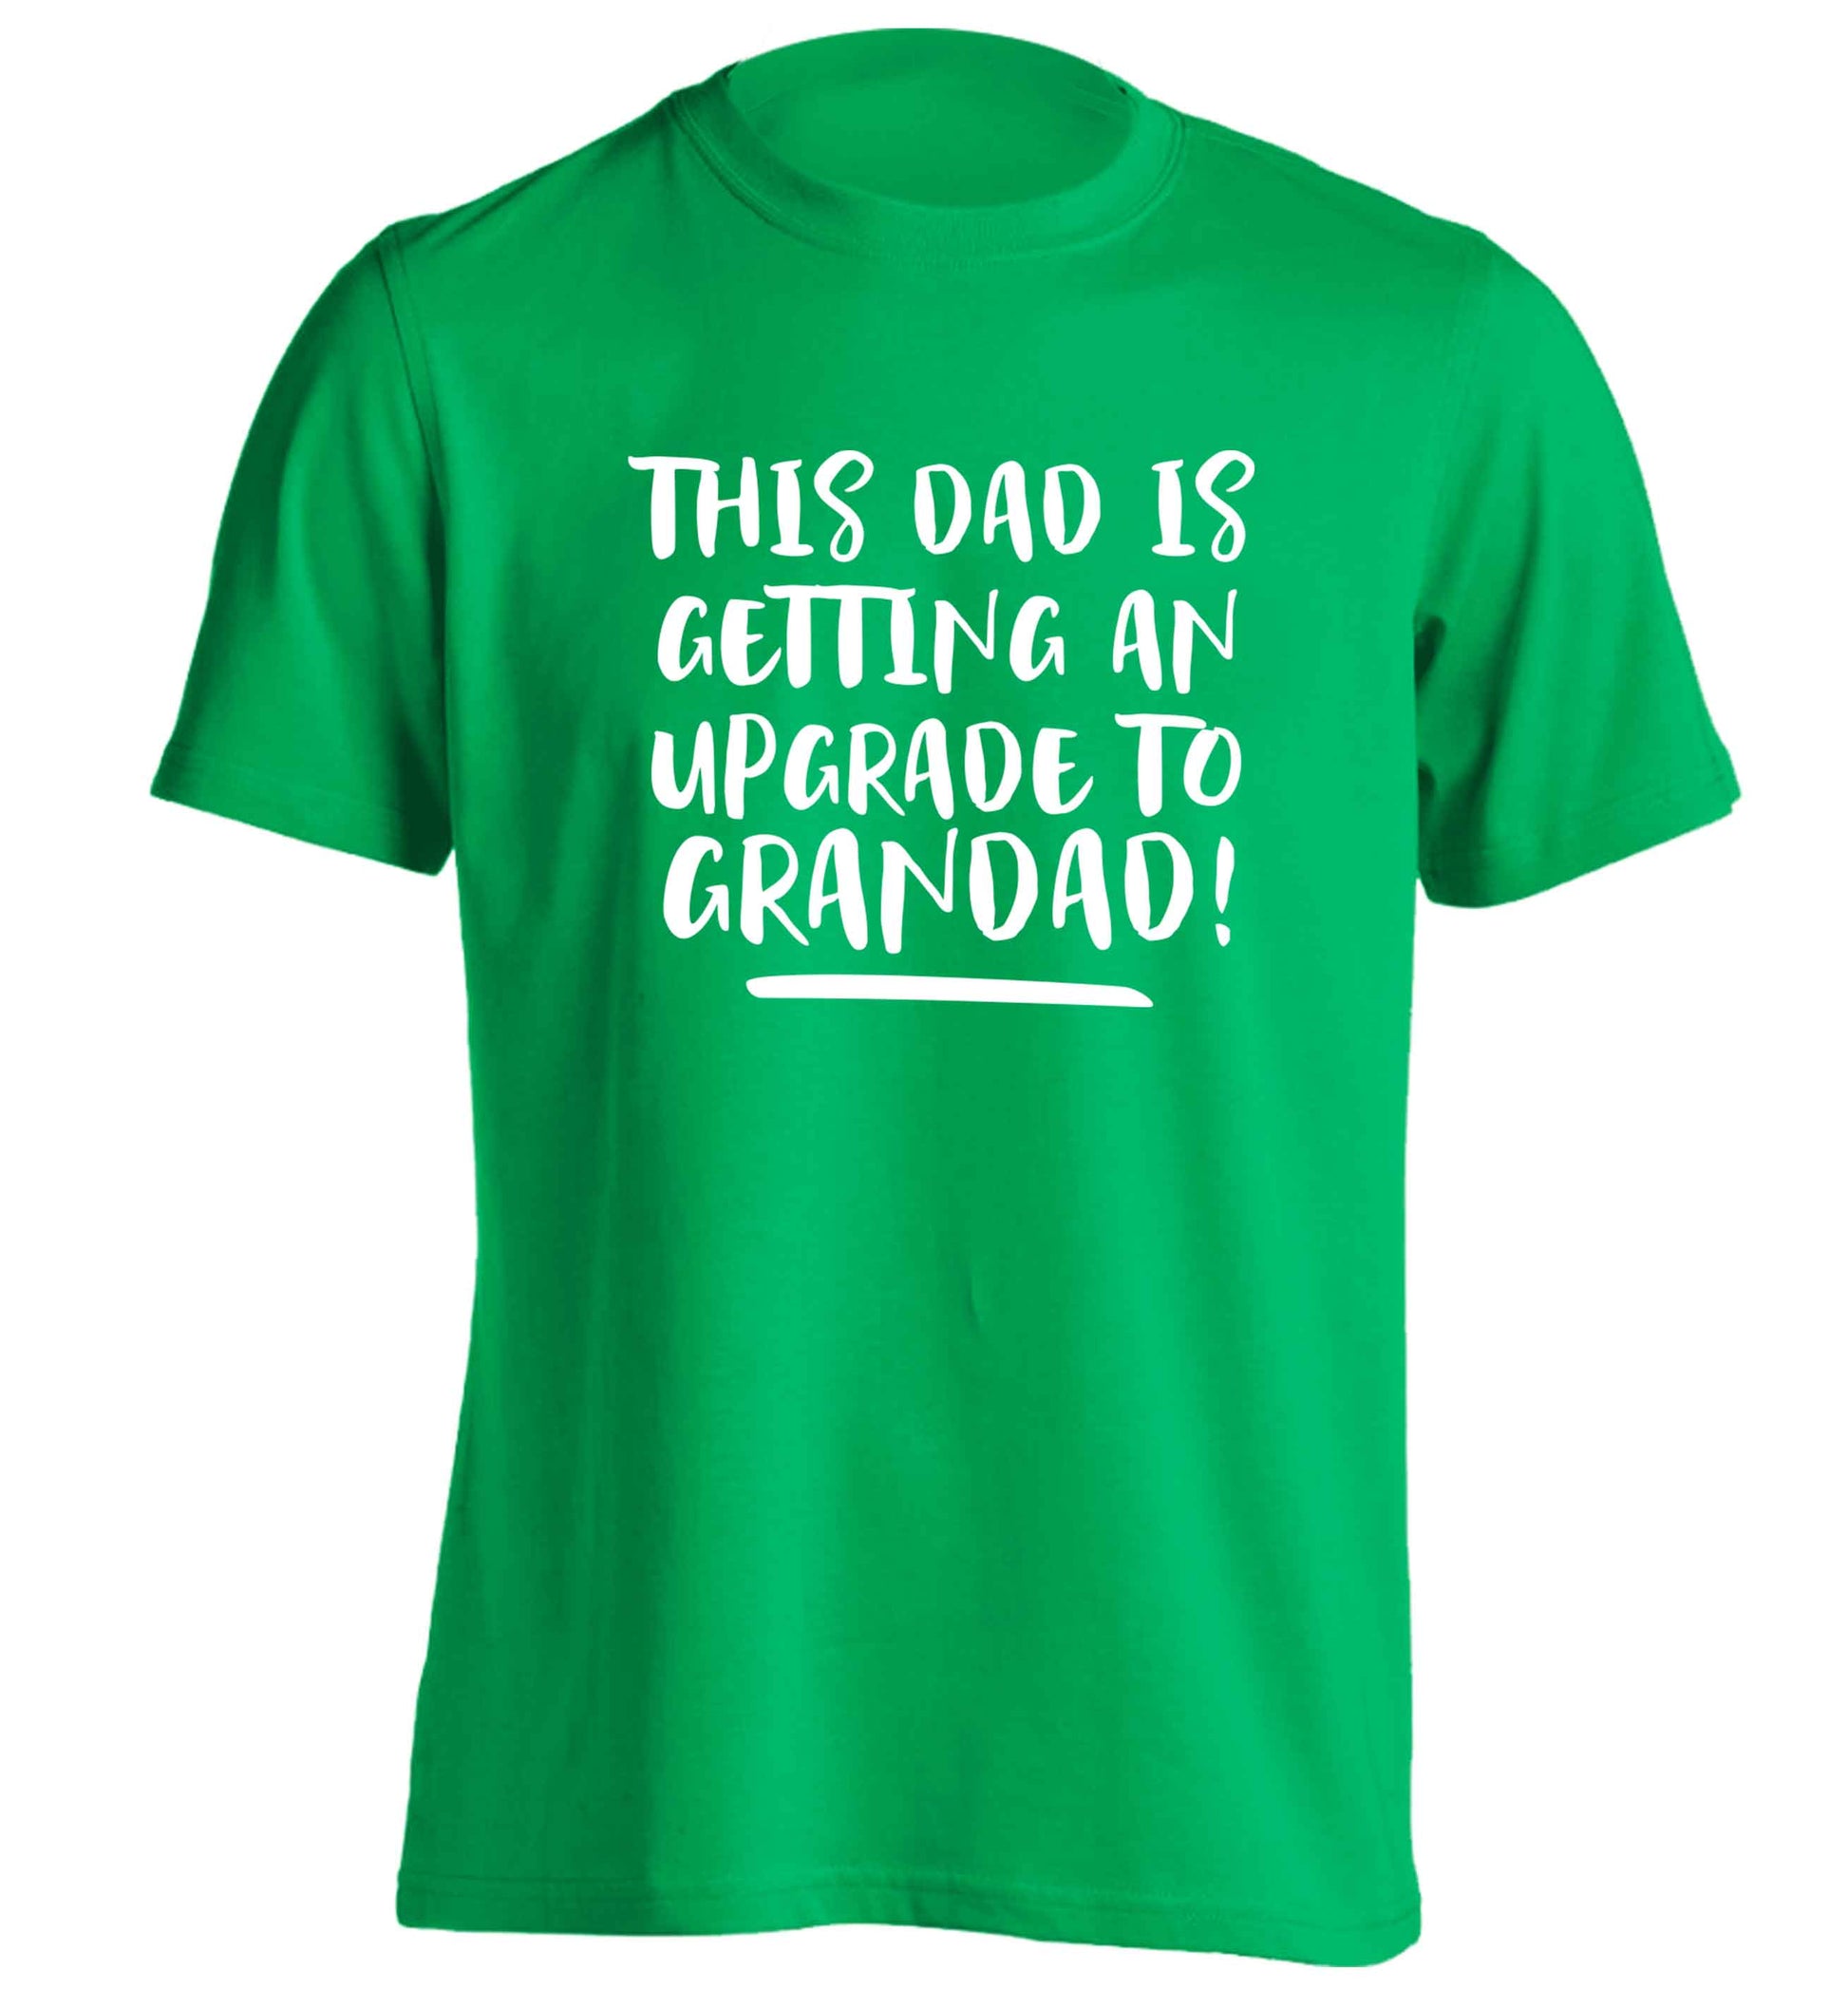 This dad is getting an upgrade to grandad! adults unisex green Tshirt 2XL